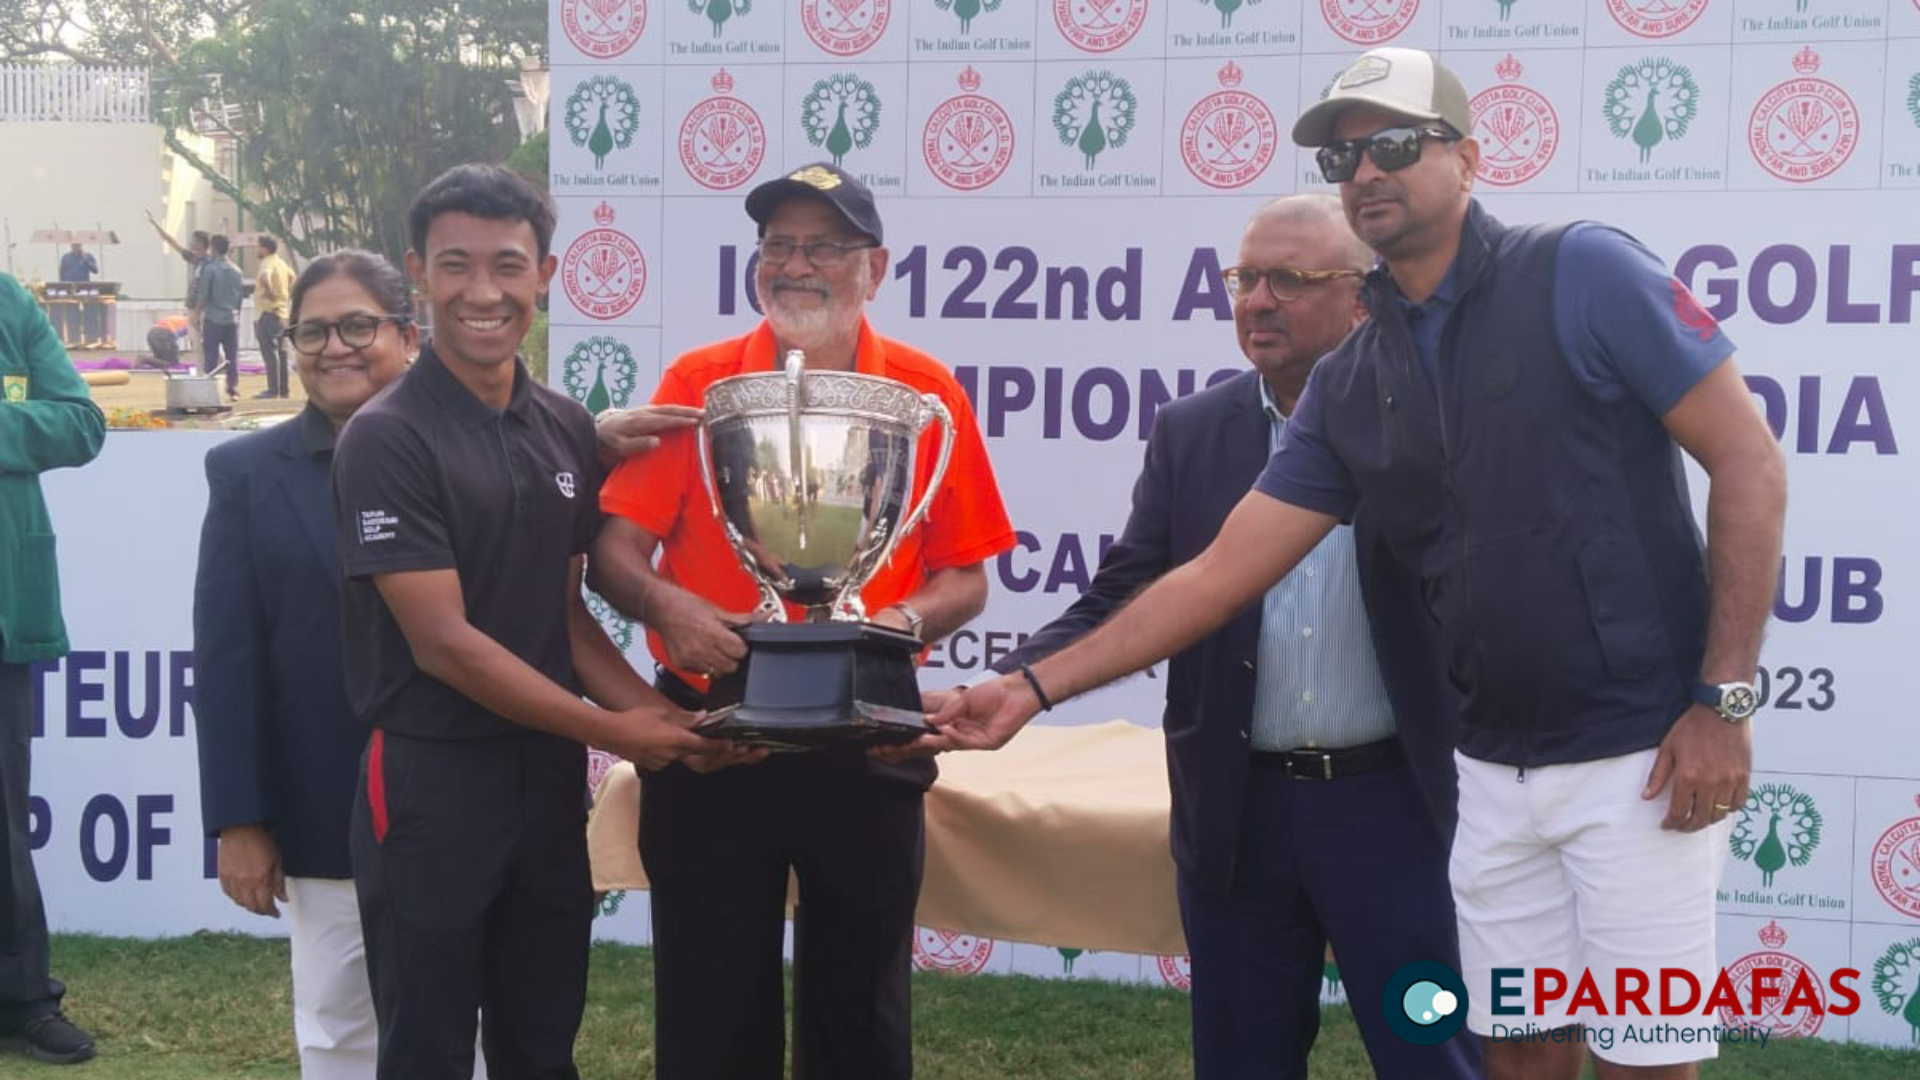 The first golfer from Nepal to win an amateur golf title in All India is Subhash Tamang